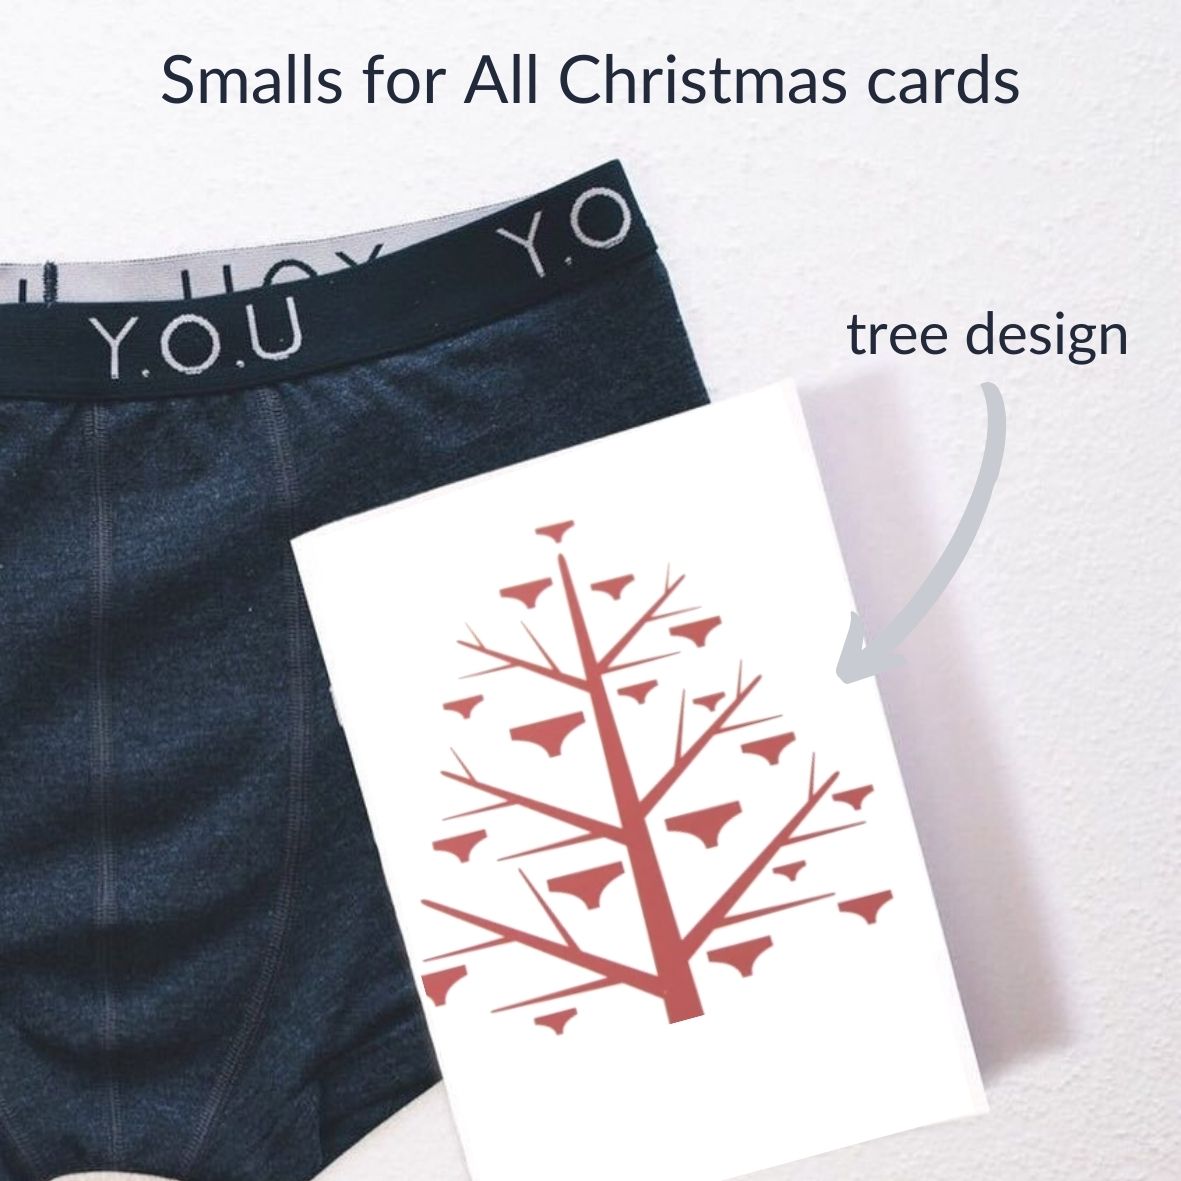 Christmas cards - Christmas tree design - pack of 10.